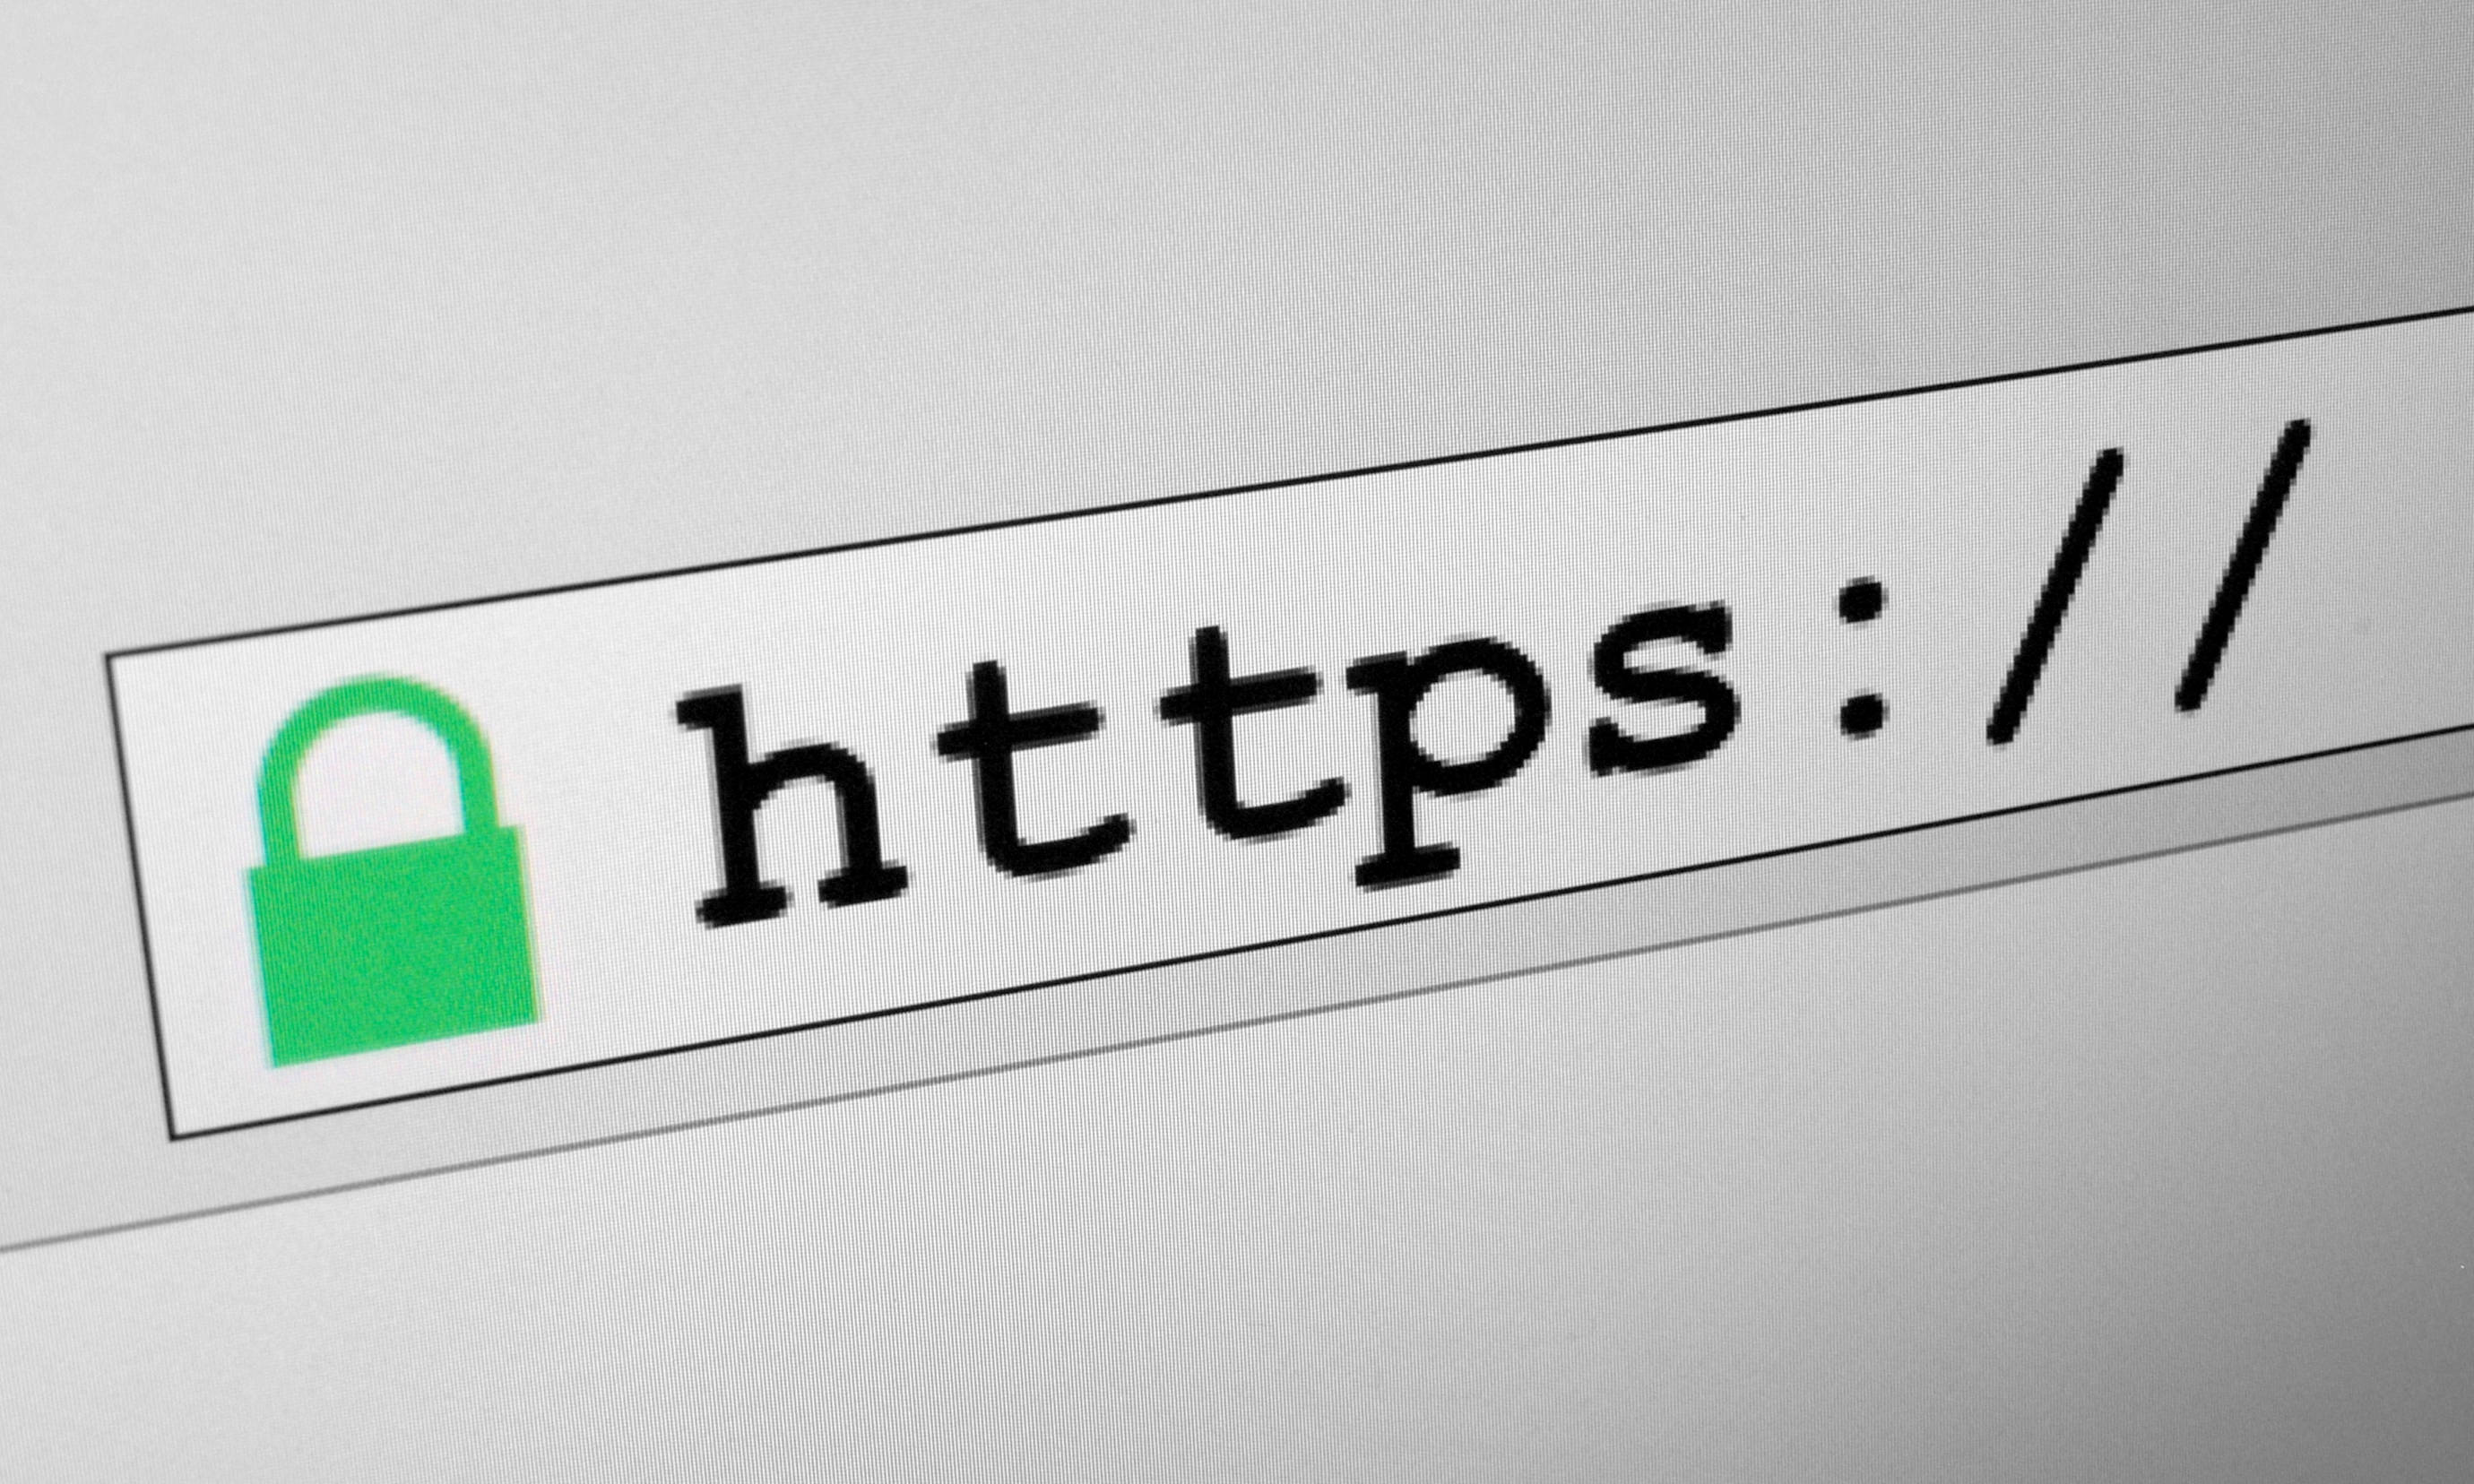 Short URLs and Malware: What You Need to Know